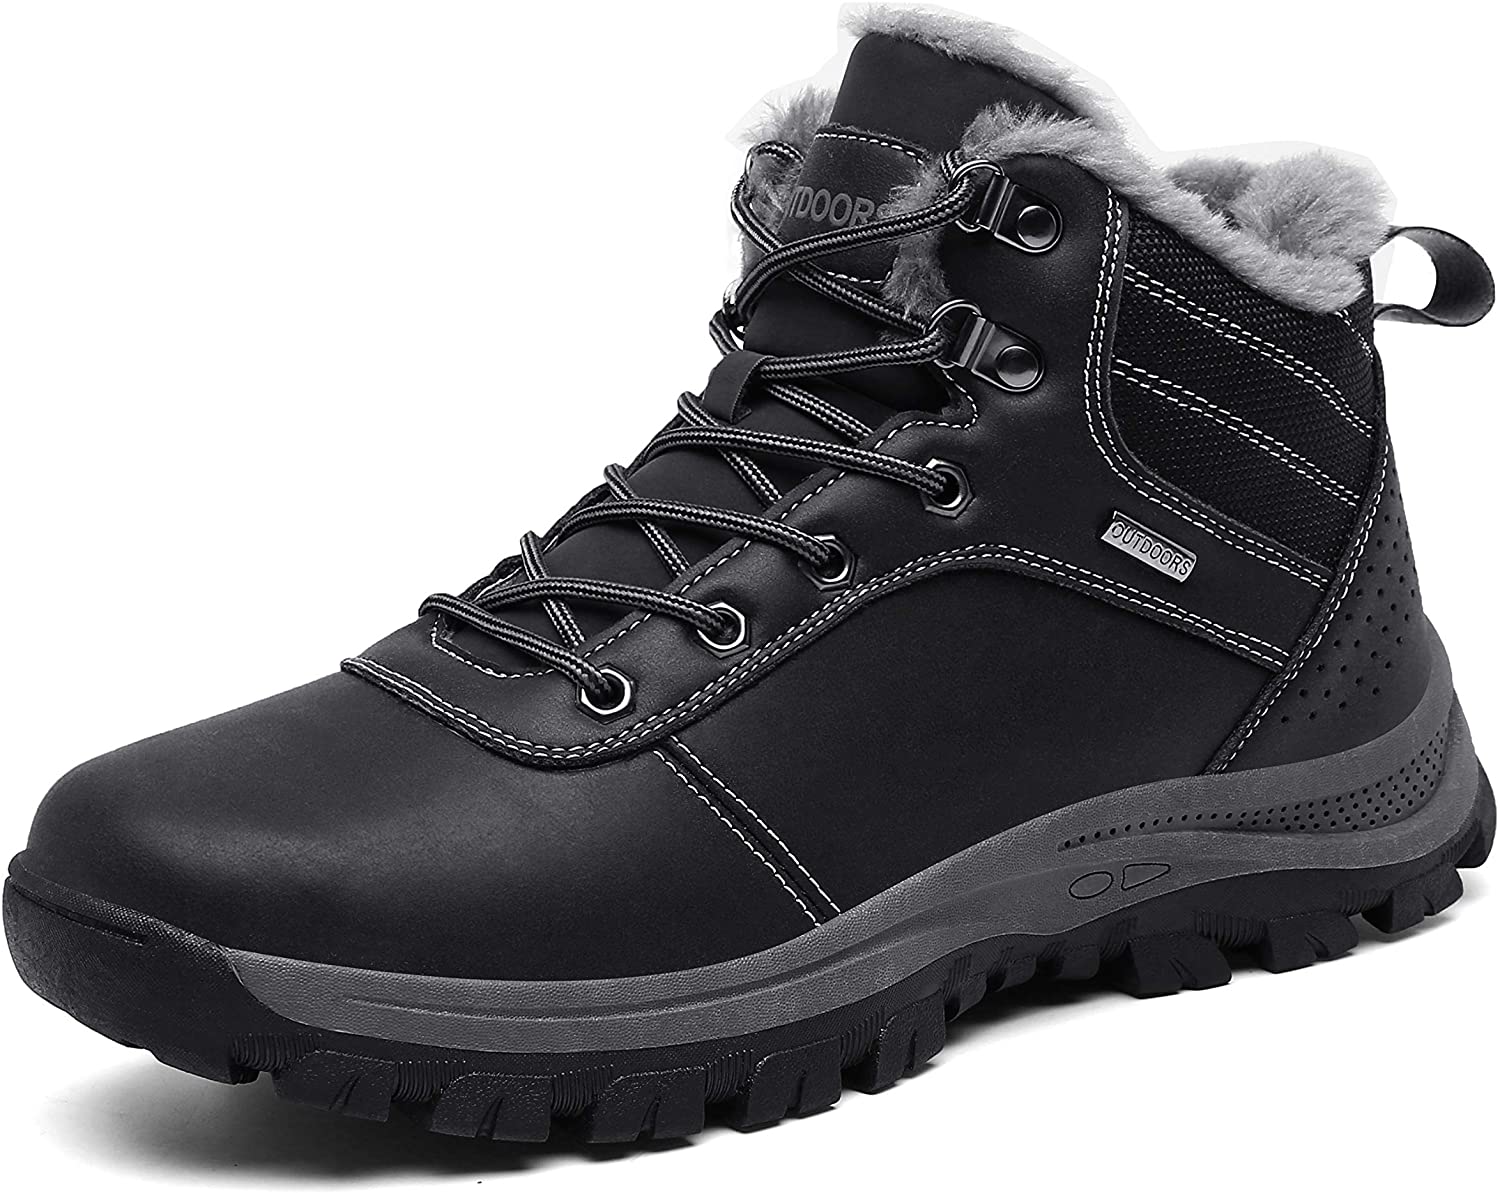 TSIODFO Winter Mens Snow Boots Waterproof Outdoor Hiking Boots for Men ...